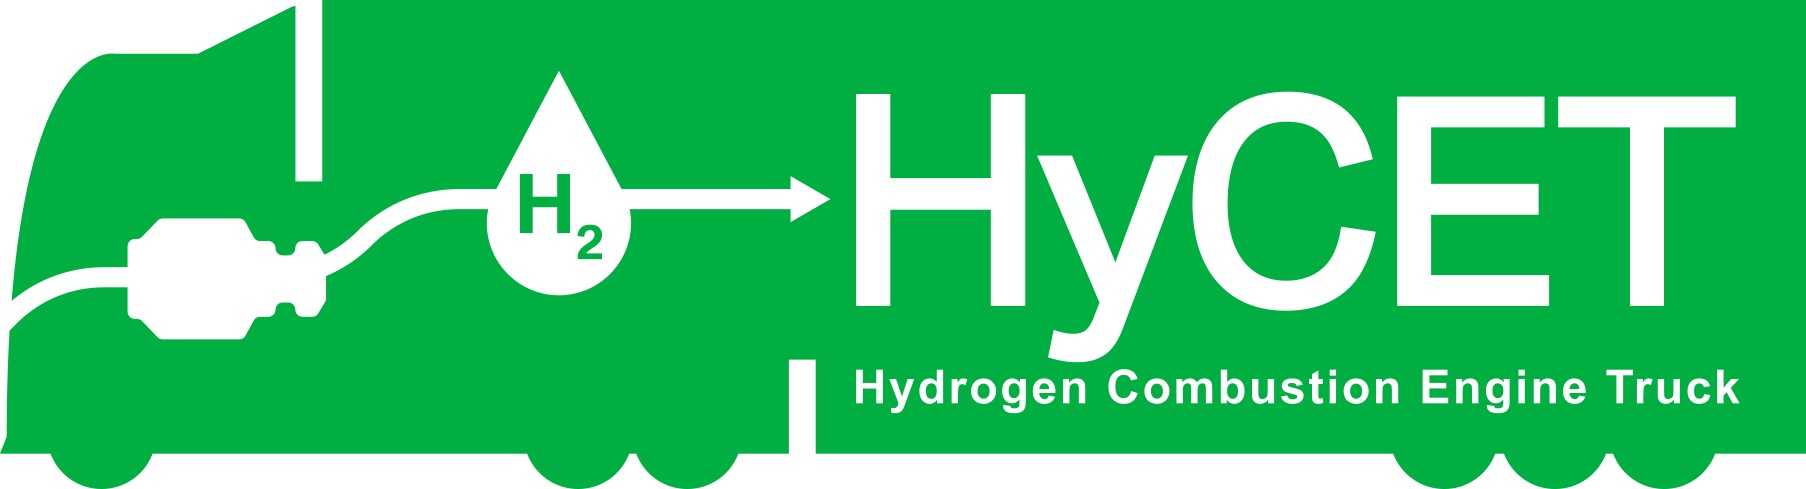 HyCET research project: Consortium promotes sustainable transport logistics using hydrogen trucks